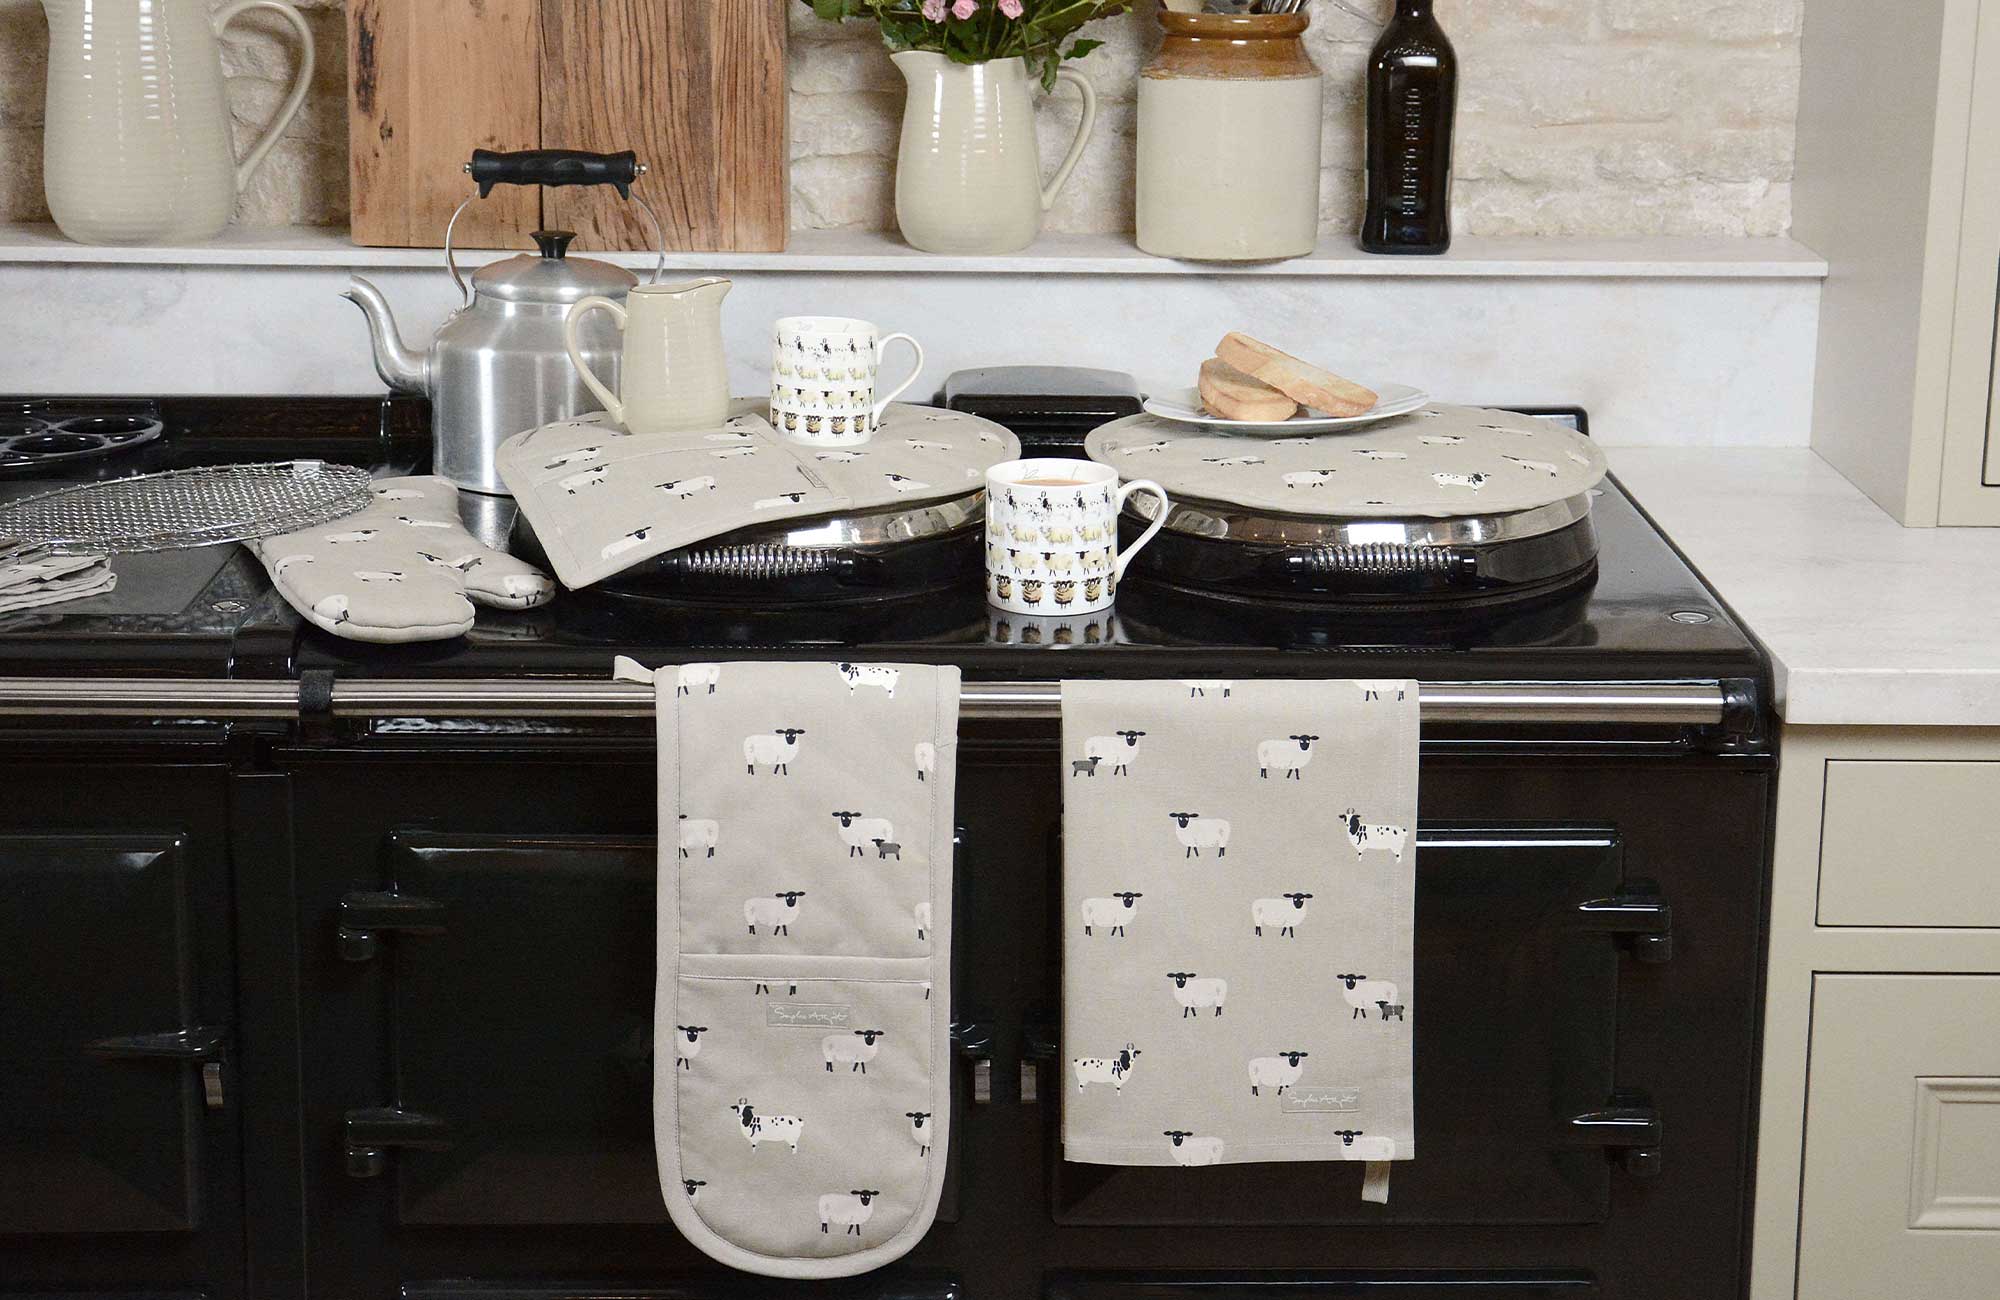 Shop The Look – The Duchess of Cambridge’s Sheep Kitchen Linens